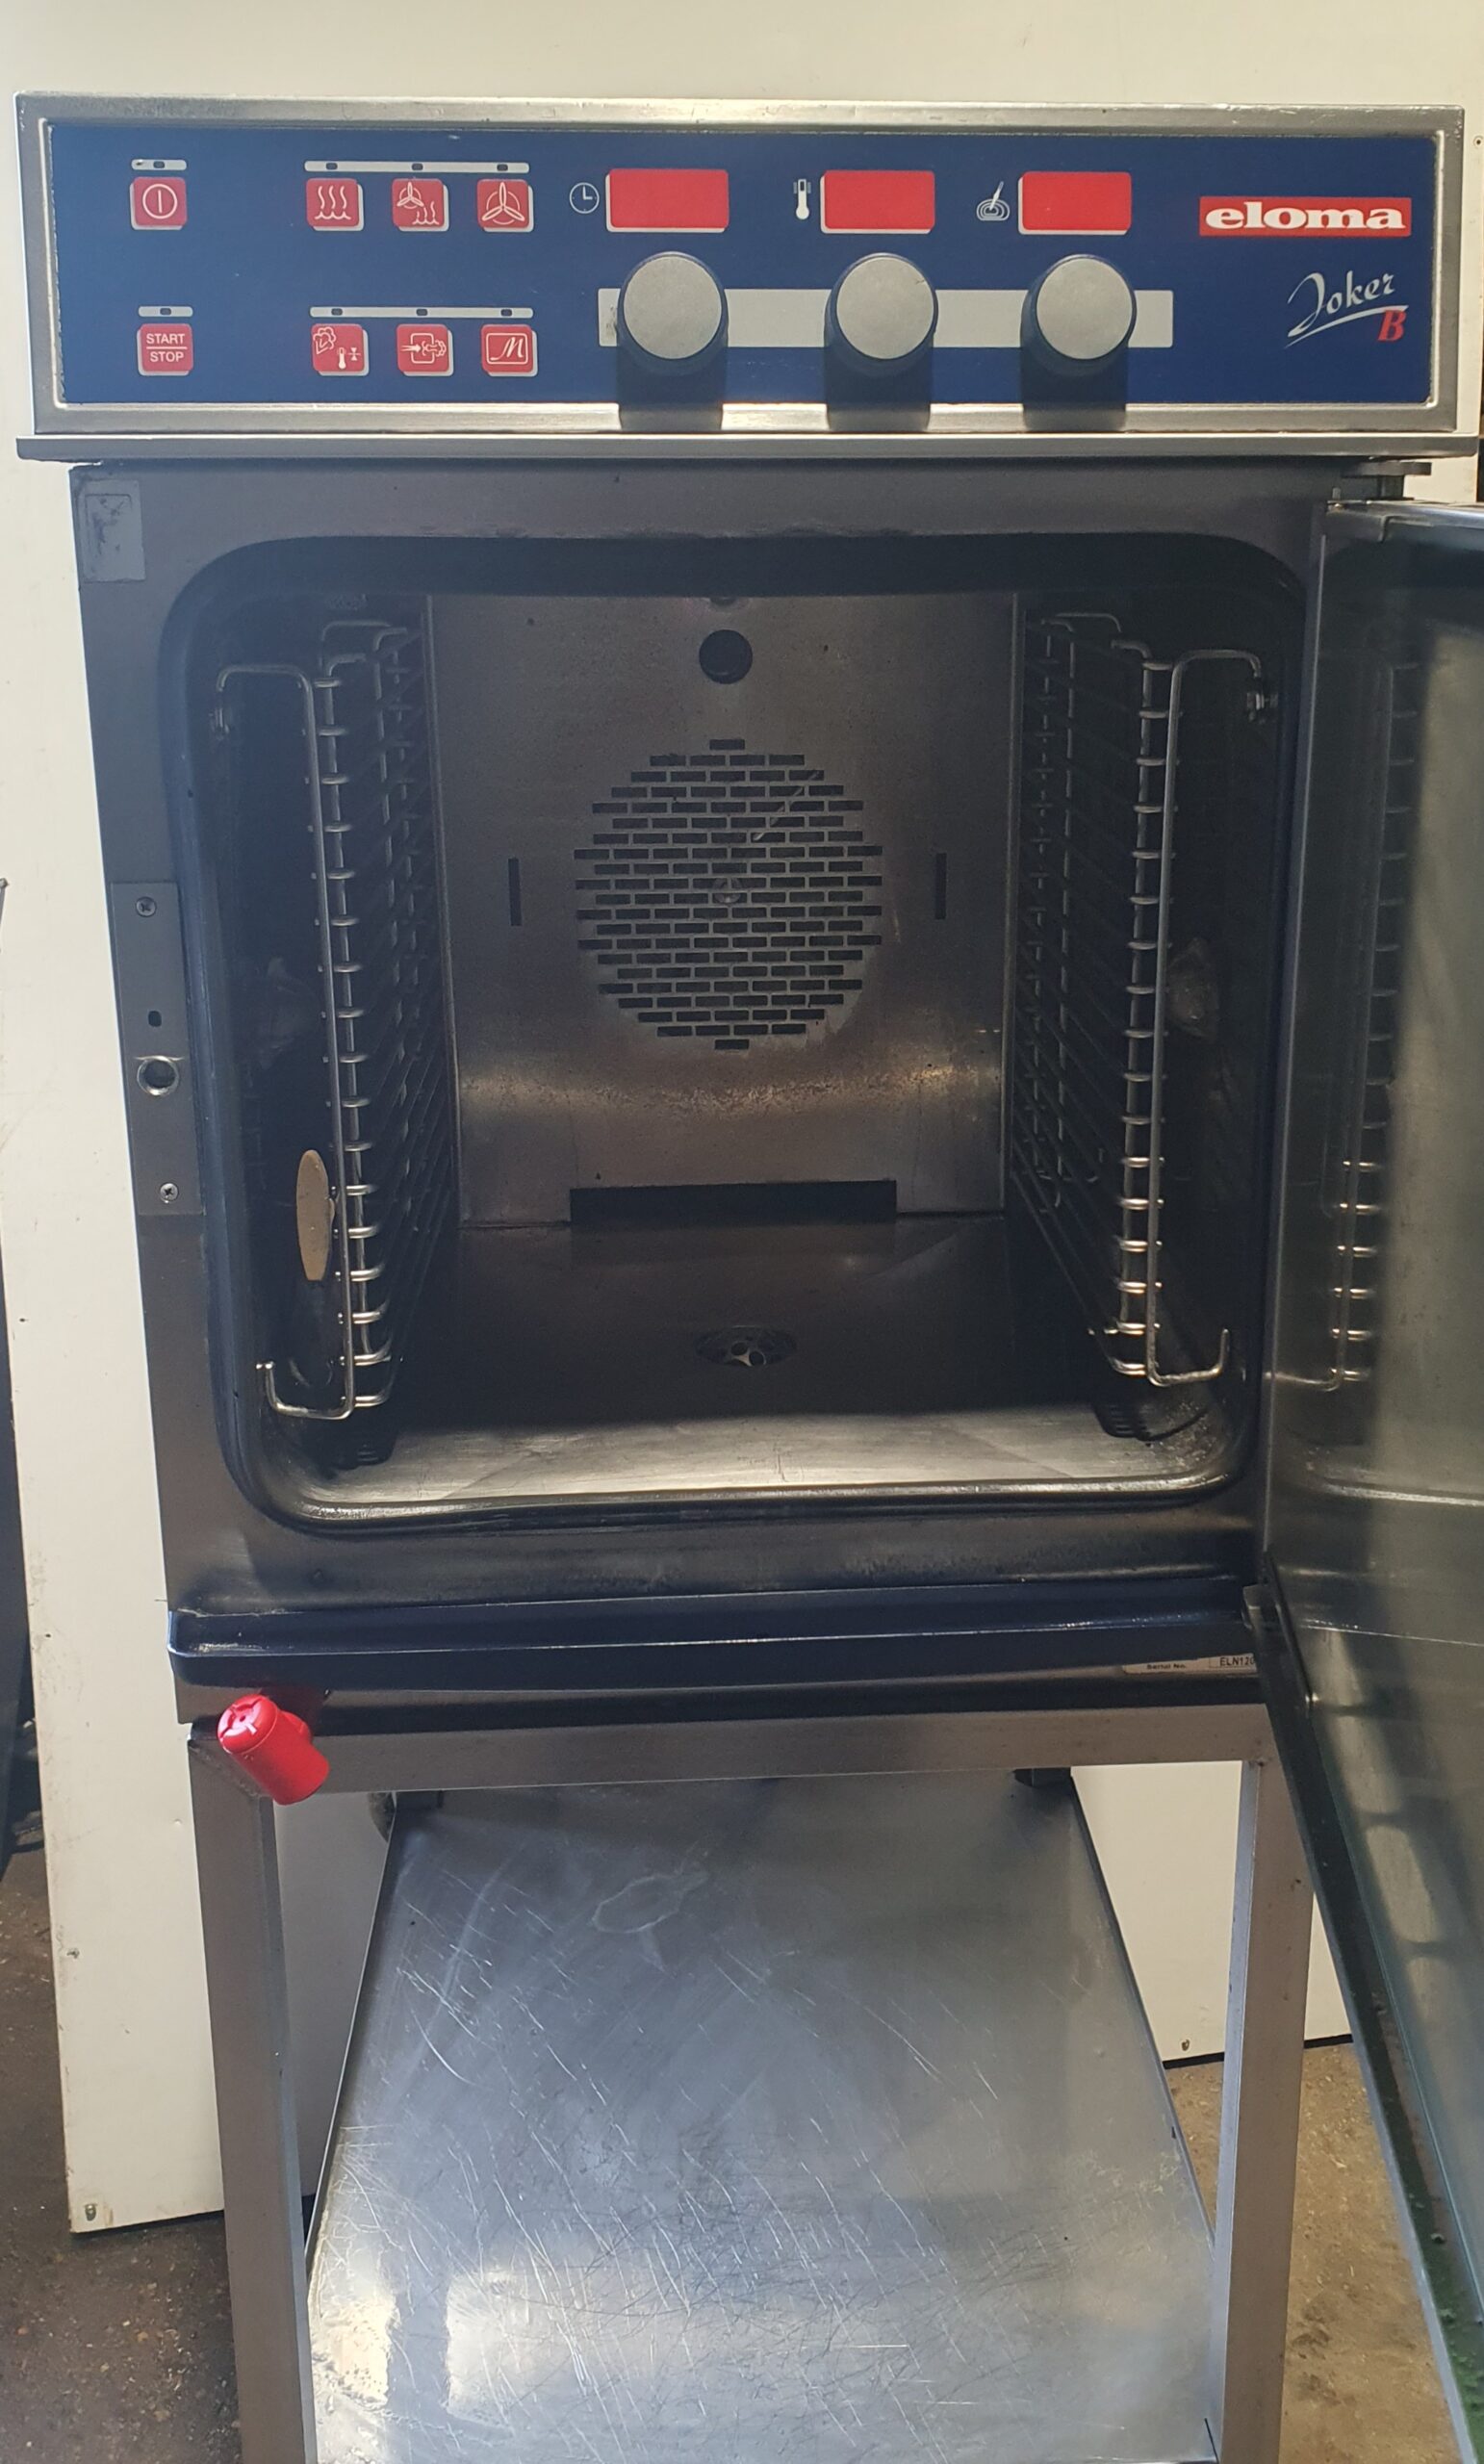 ELOMA Joker Combi Oven with Stand